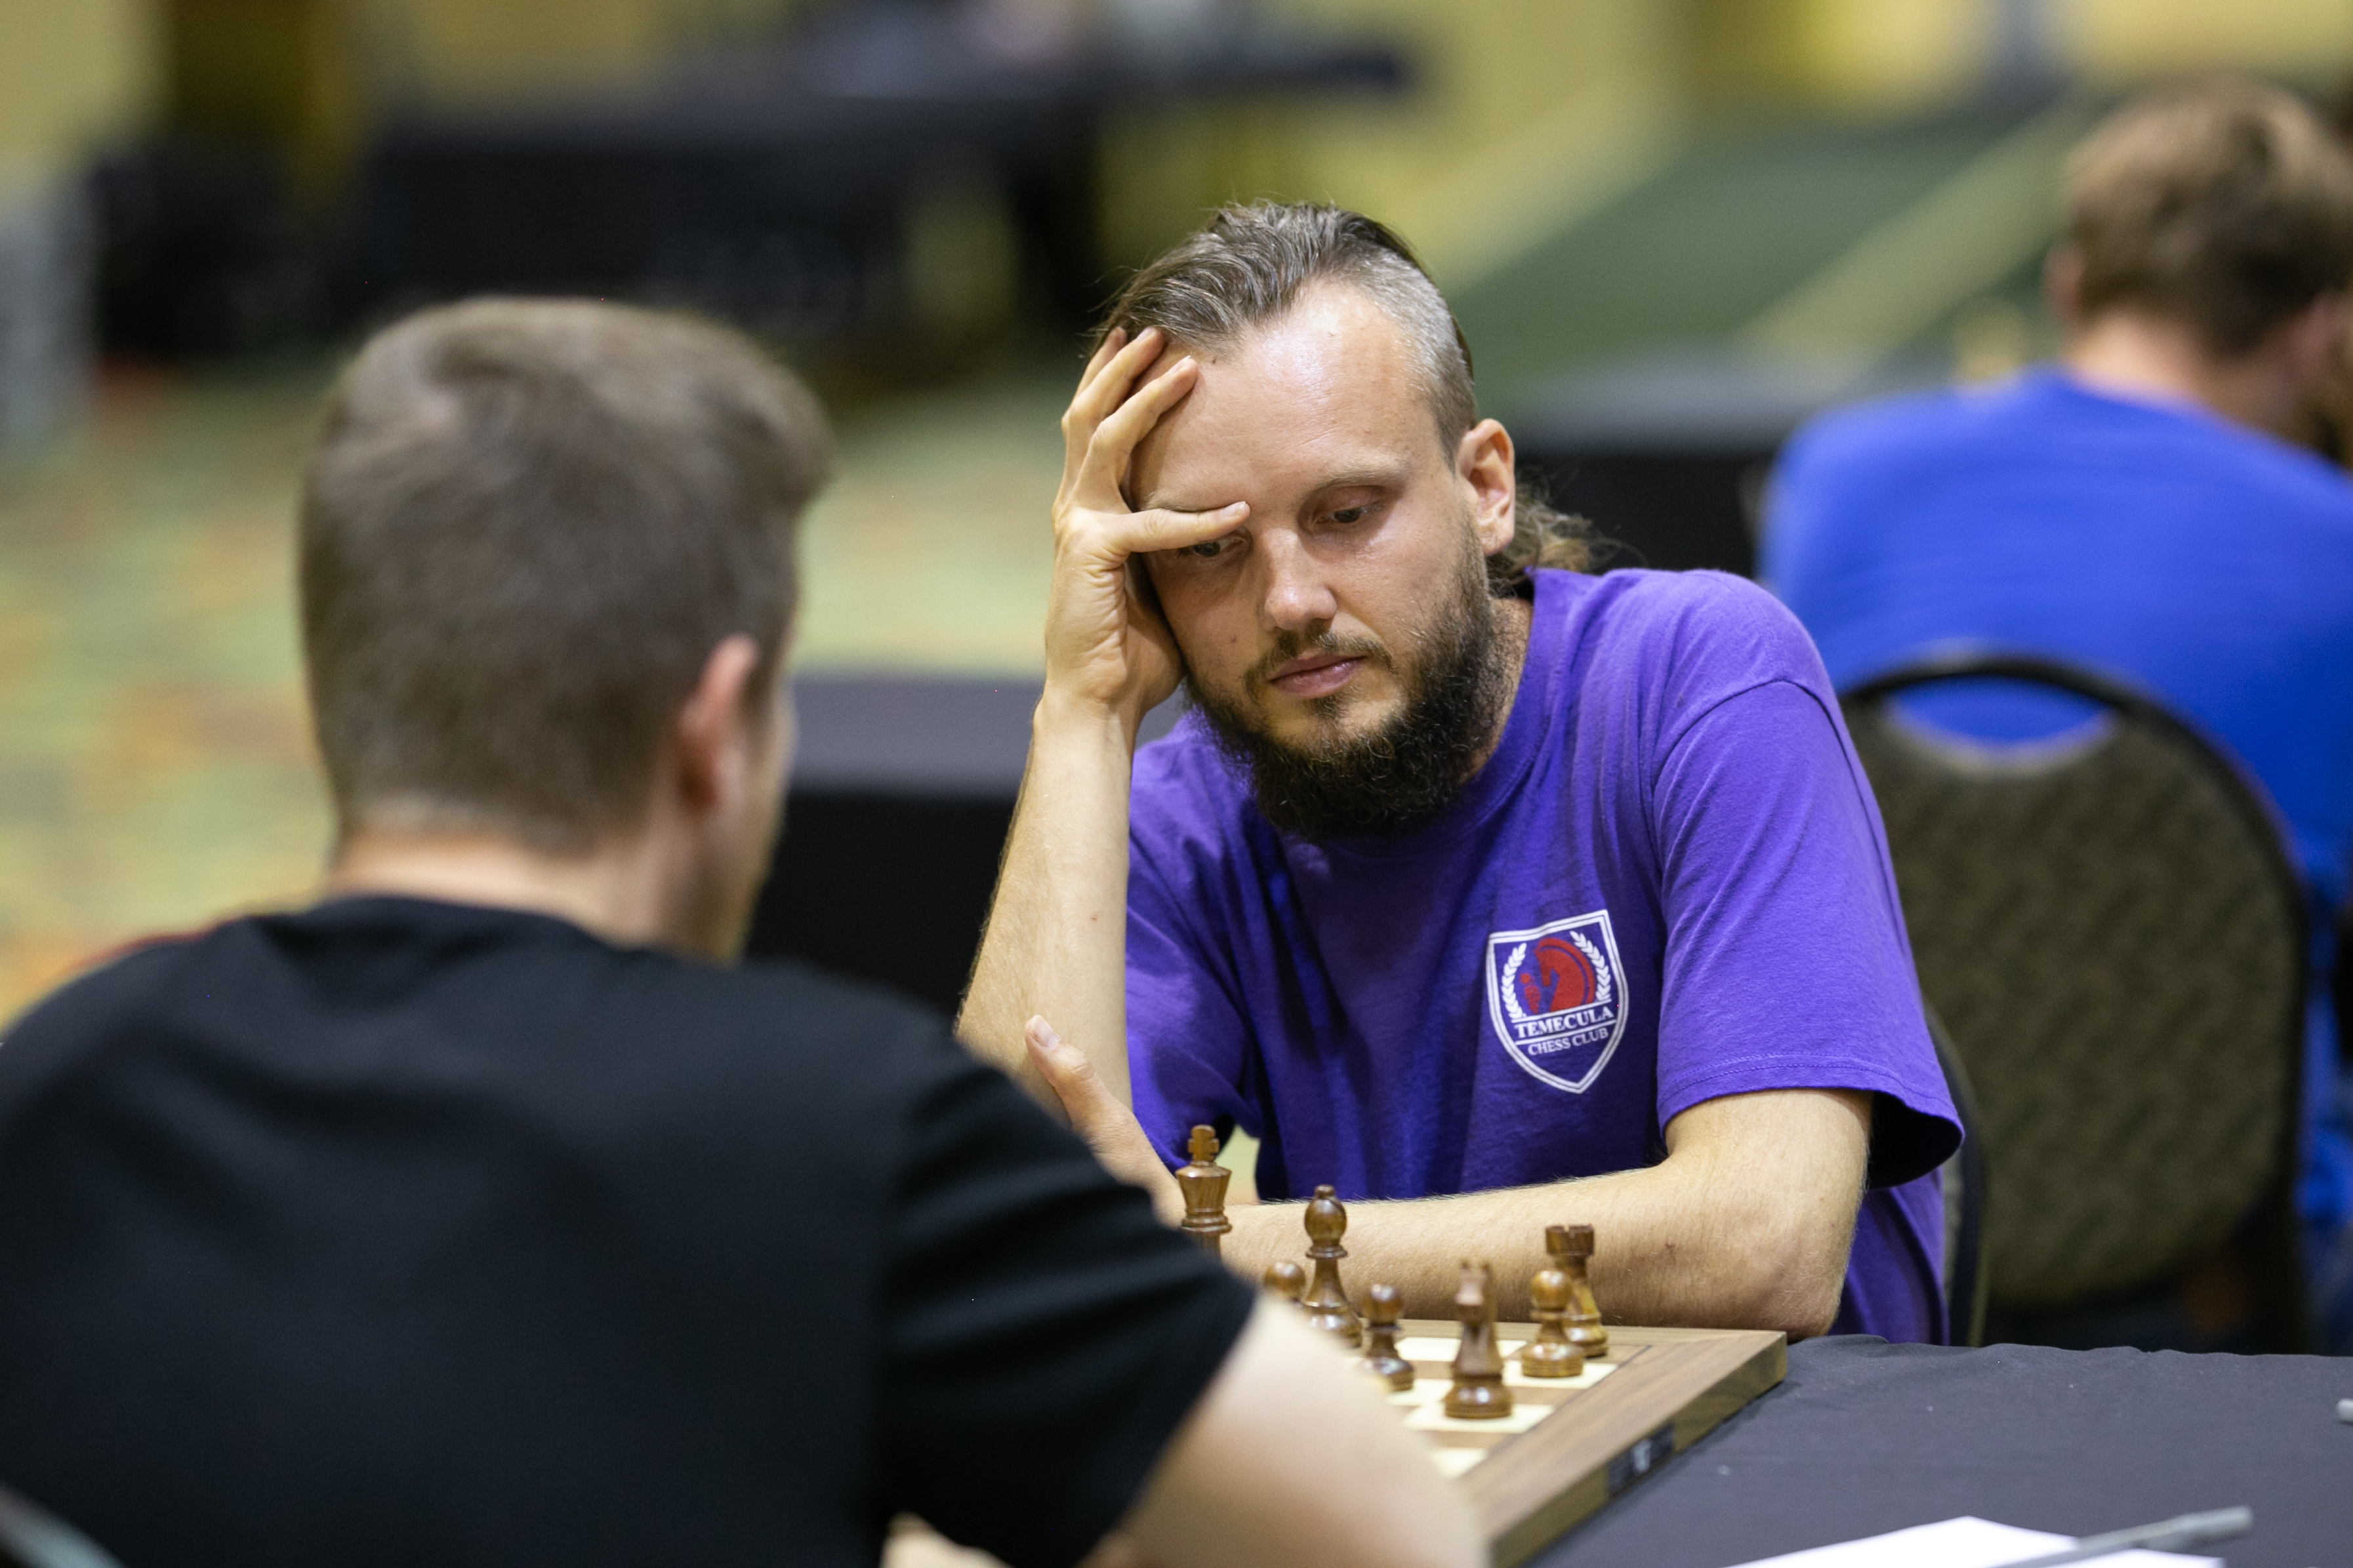 Timur Gareyev Plays Record 48 Games Blindfolded - Now Recognized